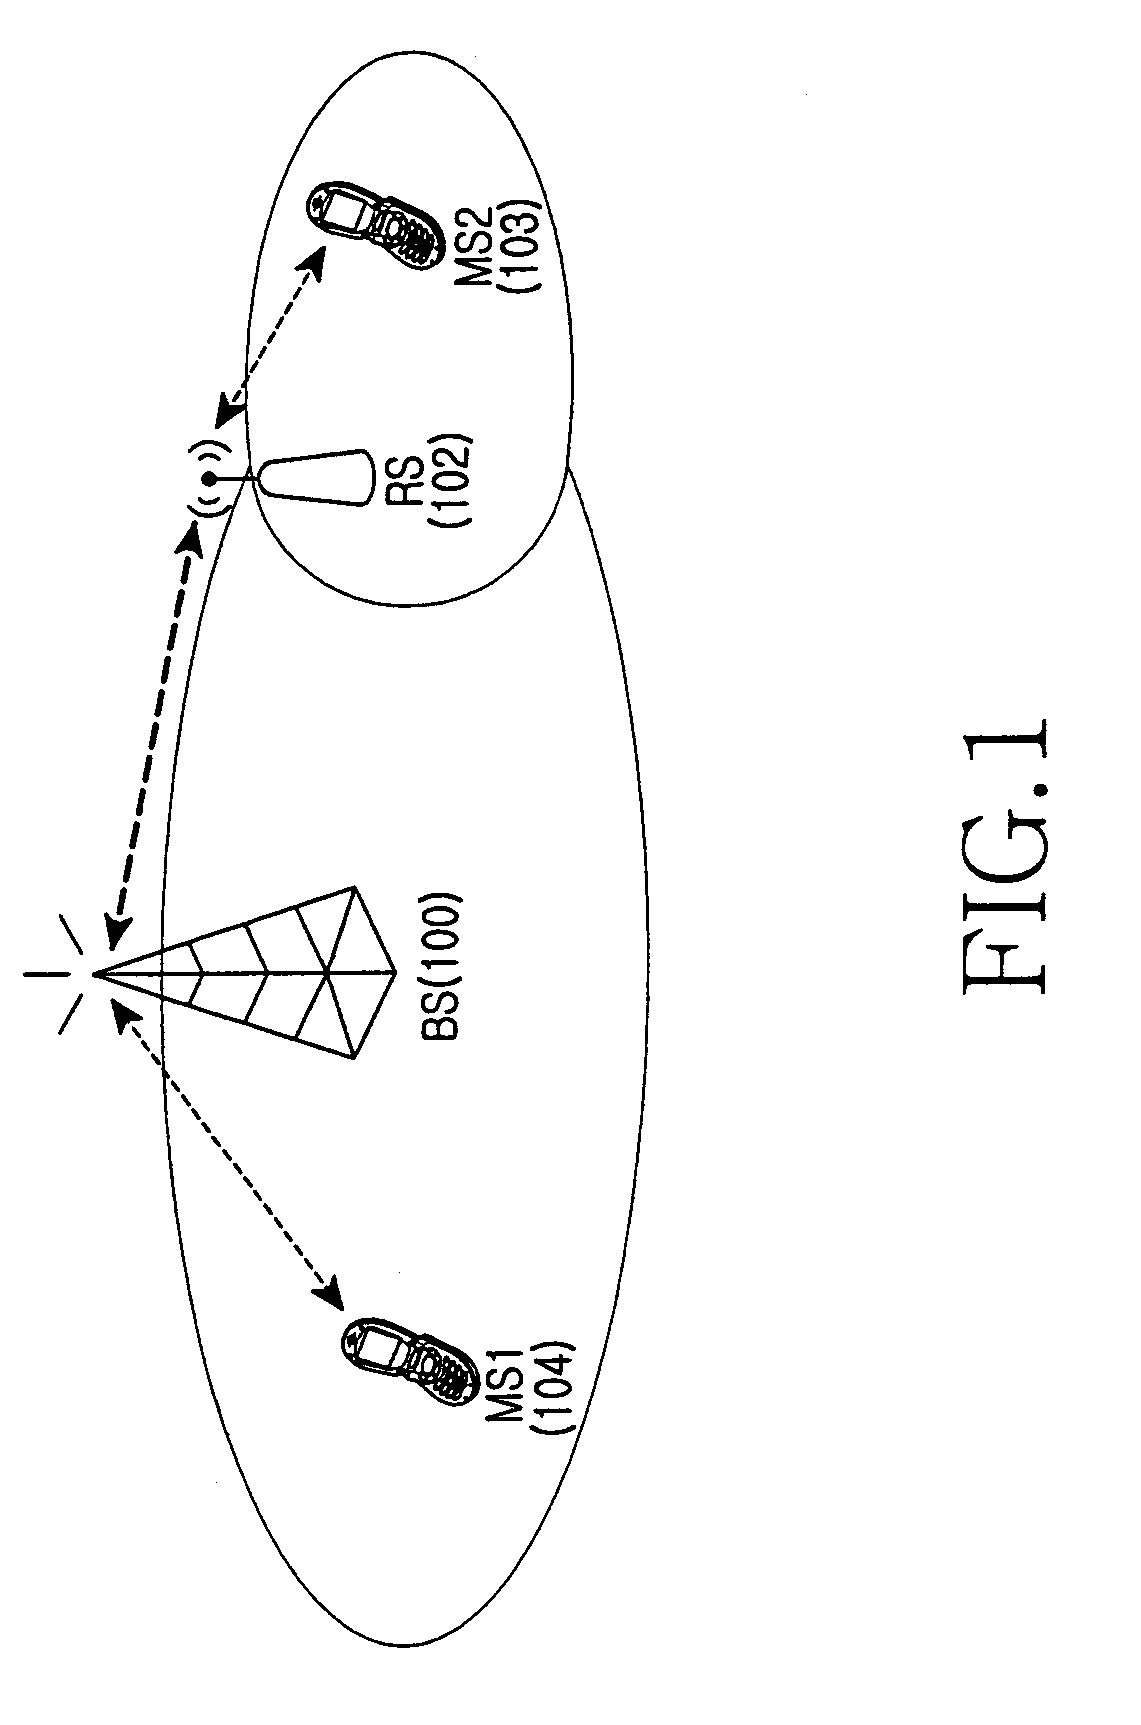 Apparatus and method for allocating uplink radio resource in wideband wireless communication system